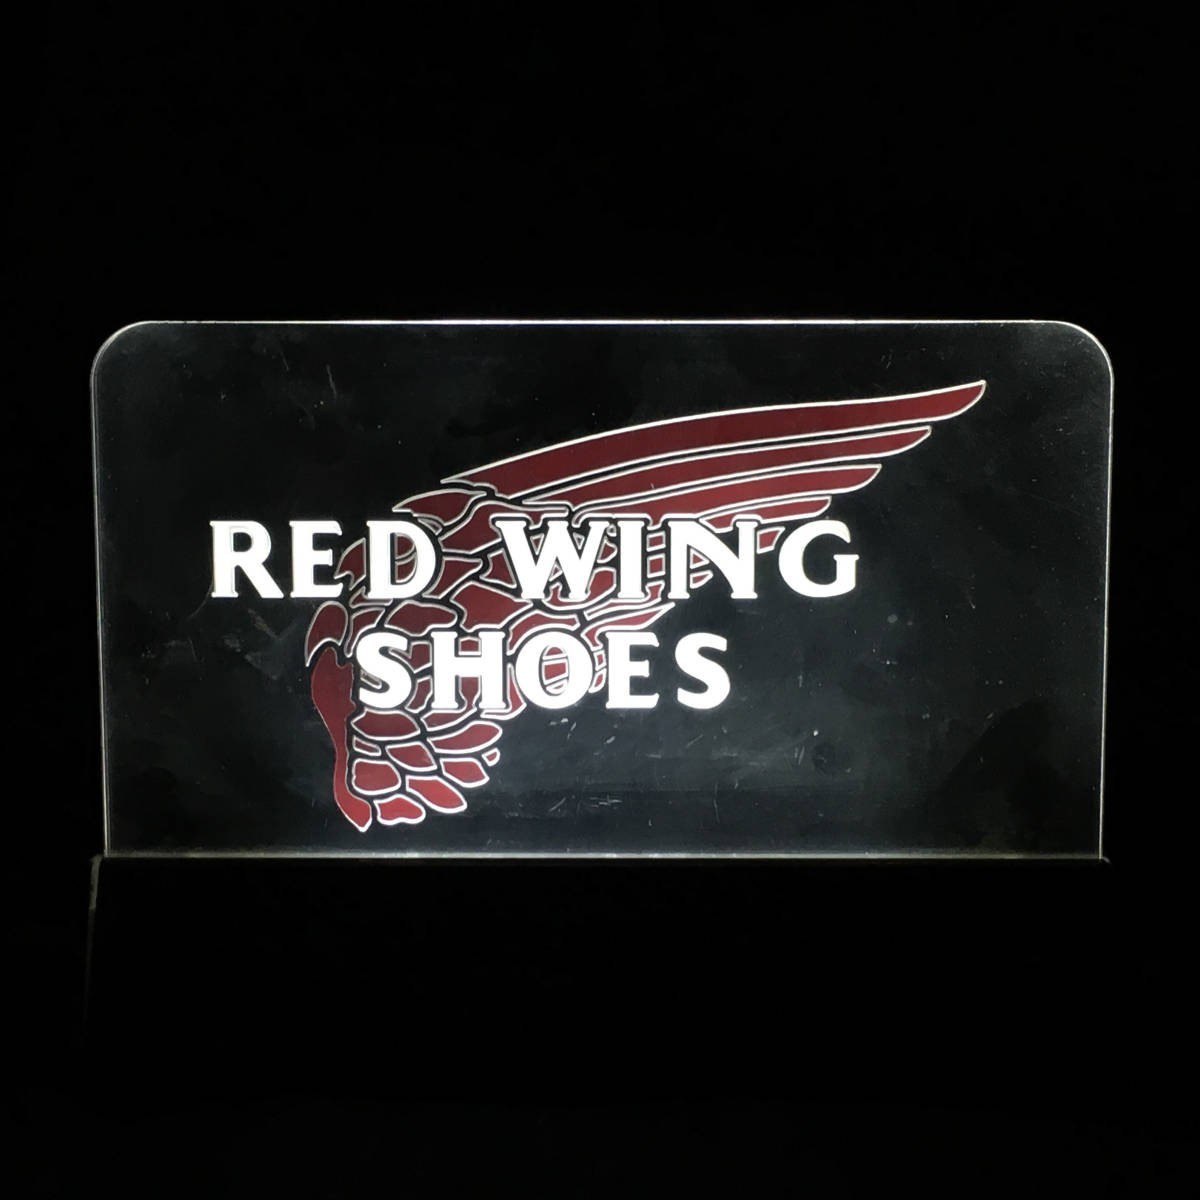 RED WING レッドウイング 販促 看板 ライト ロゴ 通電確認済み